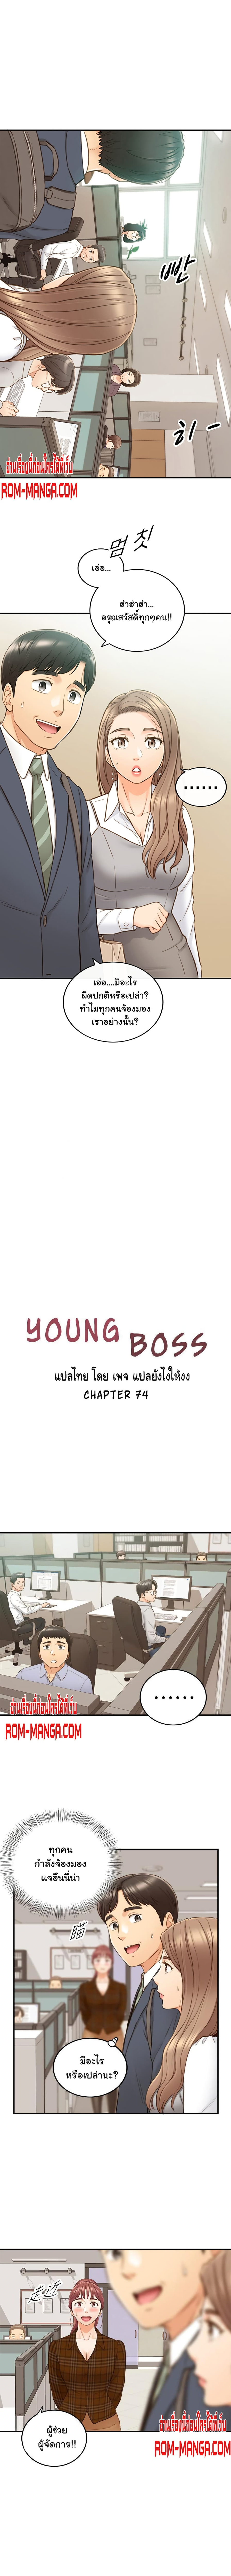 Young Boss 74-74